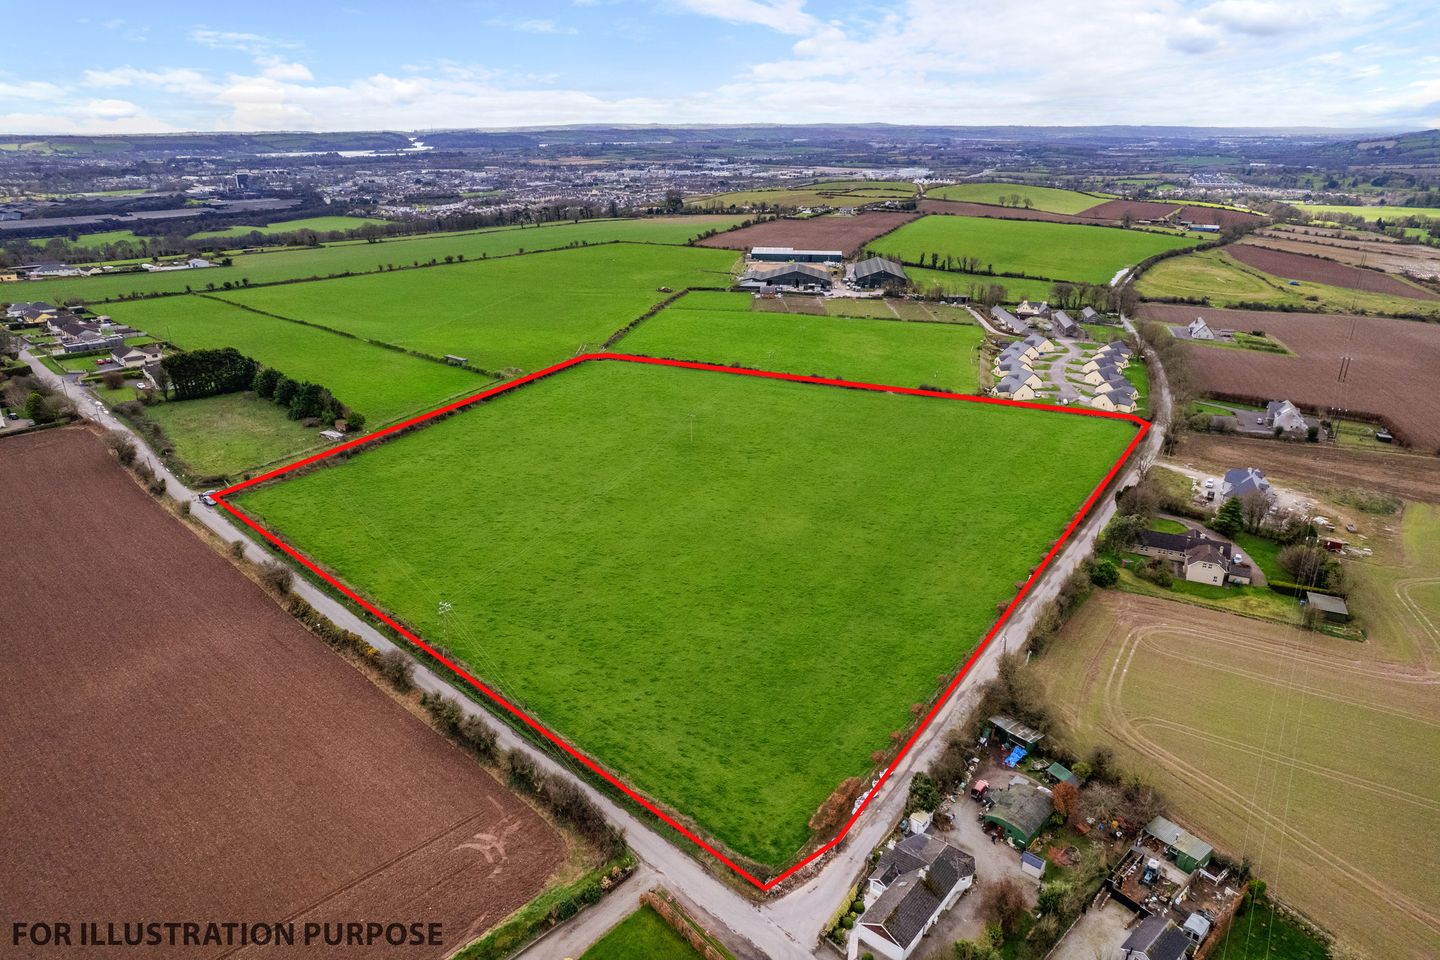 10.5 Acres at Broomfield, Midleton, Co. Cork, P25DW32